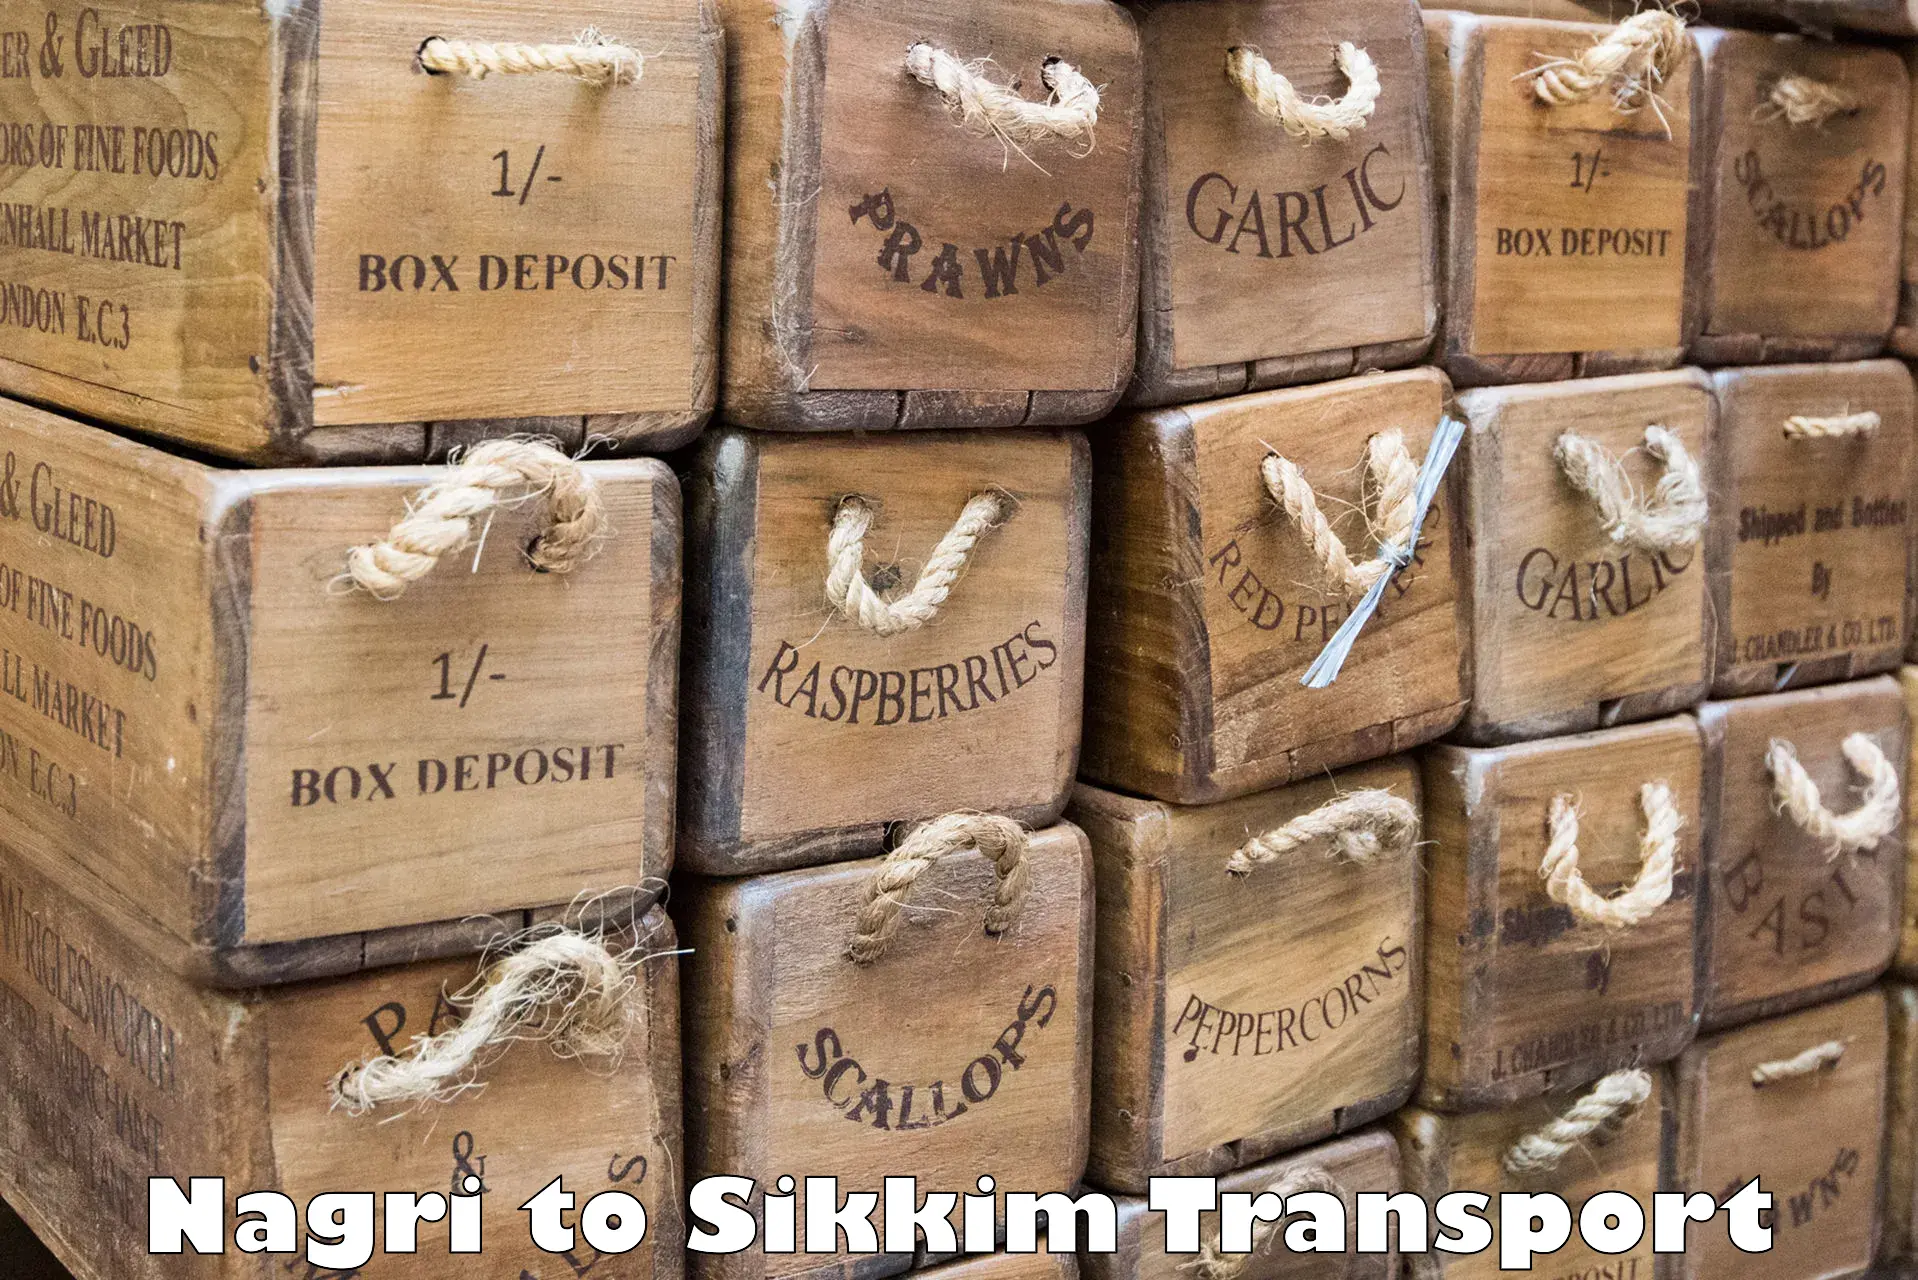 Delivery service Nagri to Sikkim